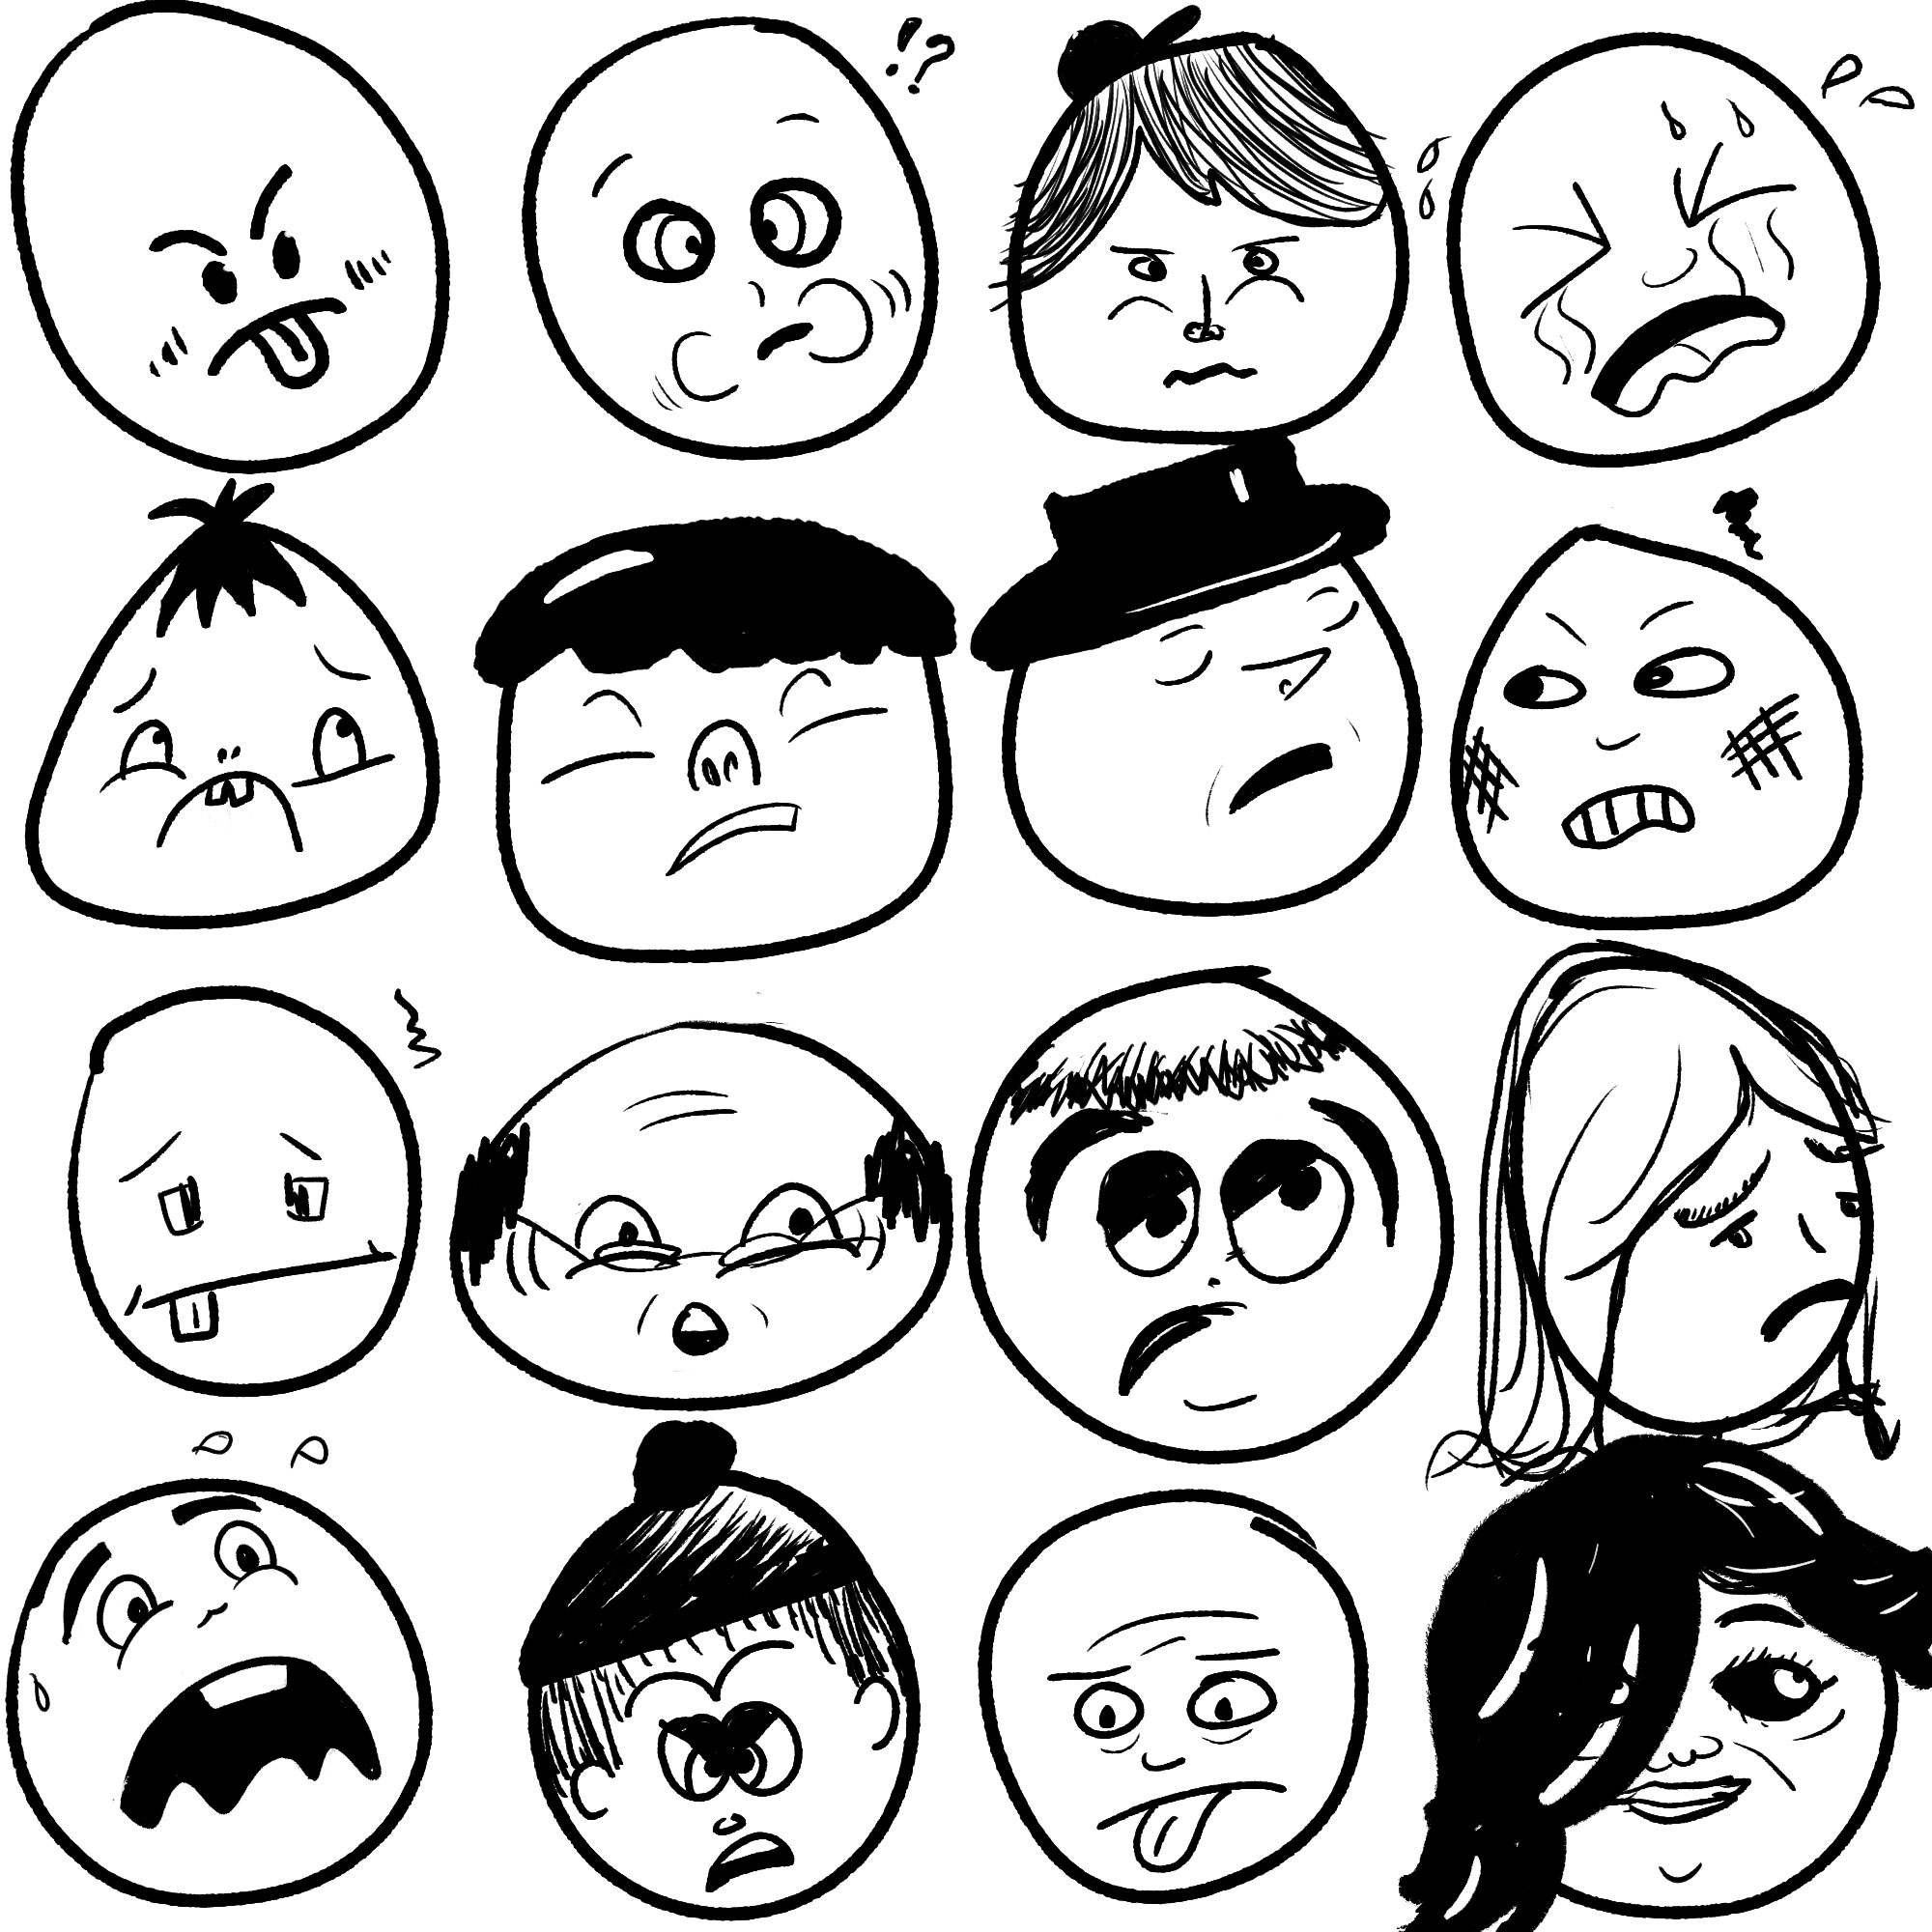 disgusted cartoon face